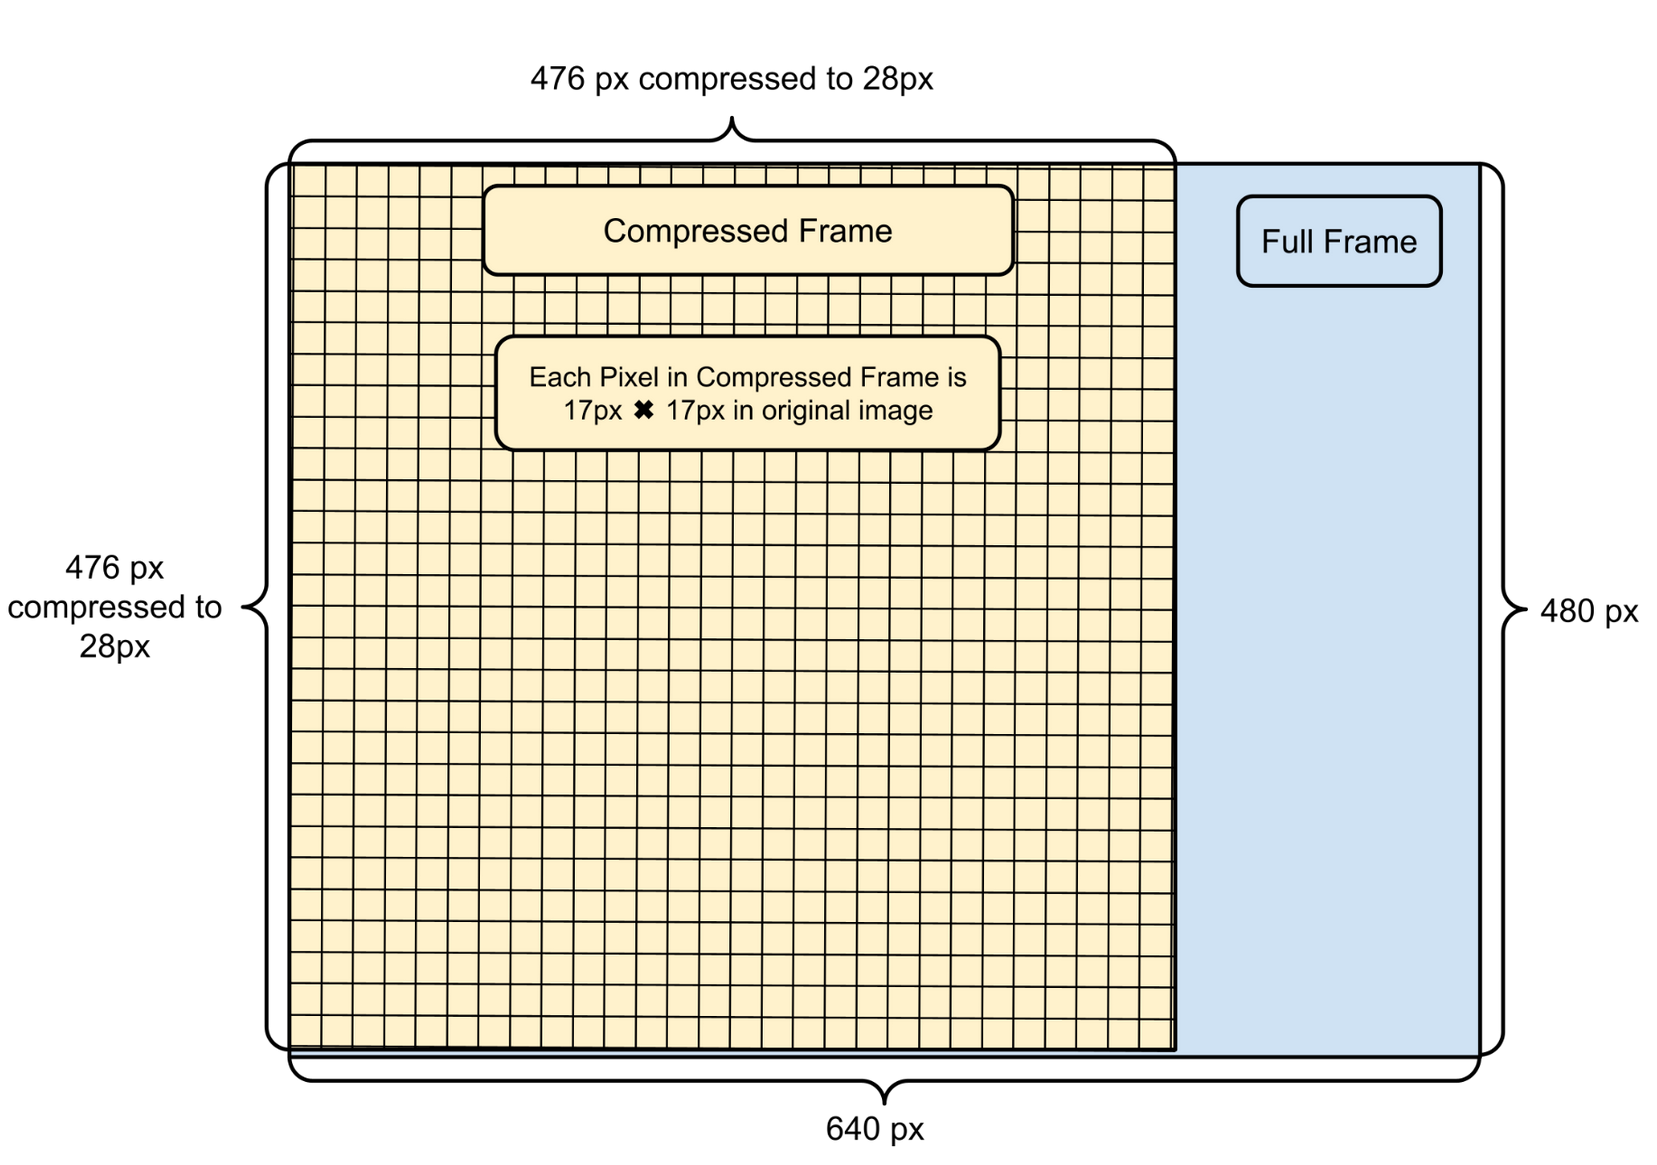 A diagram of how the VGA image was sampled for compression